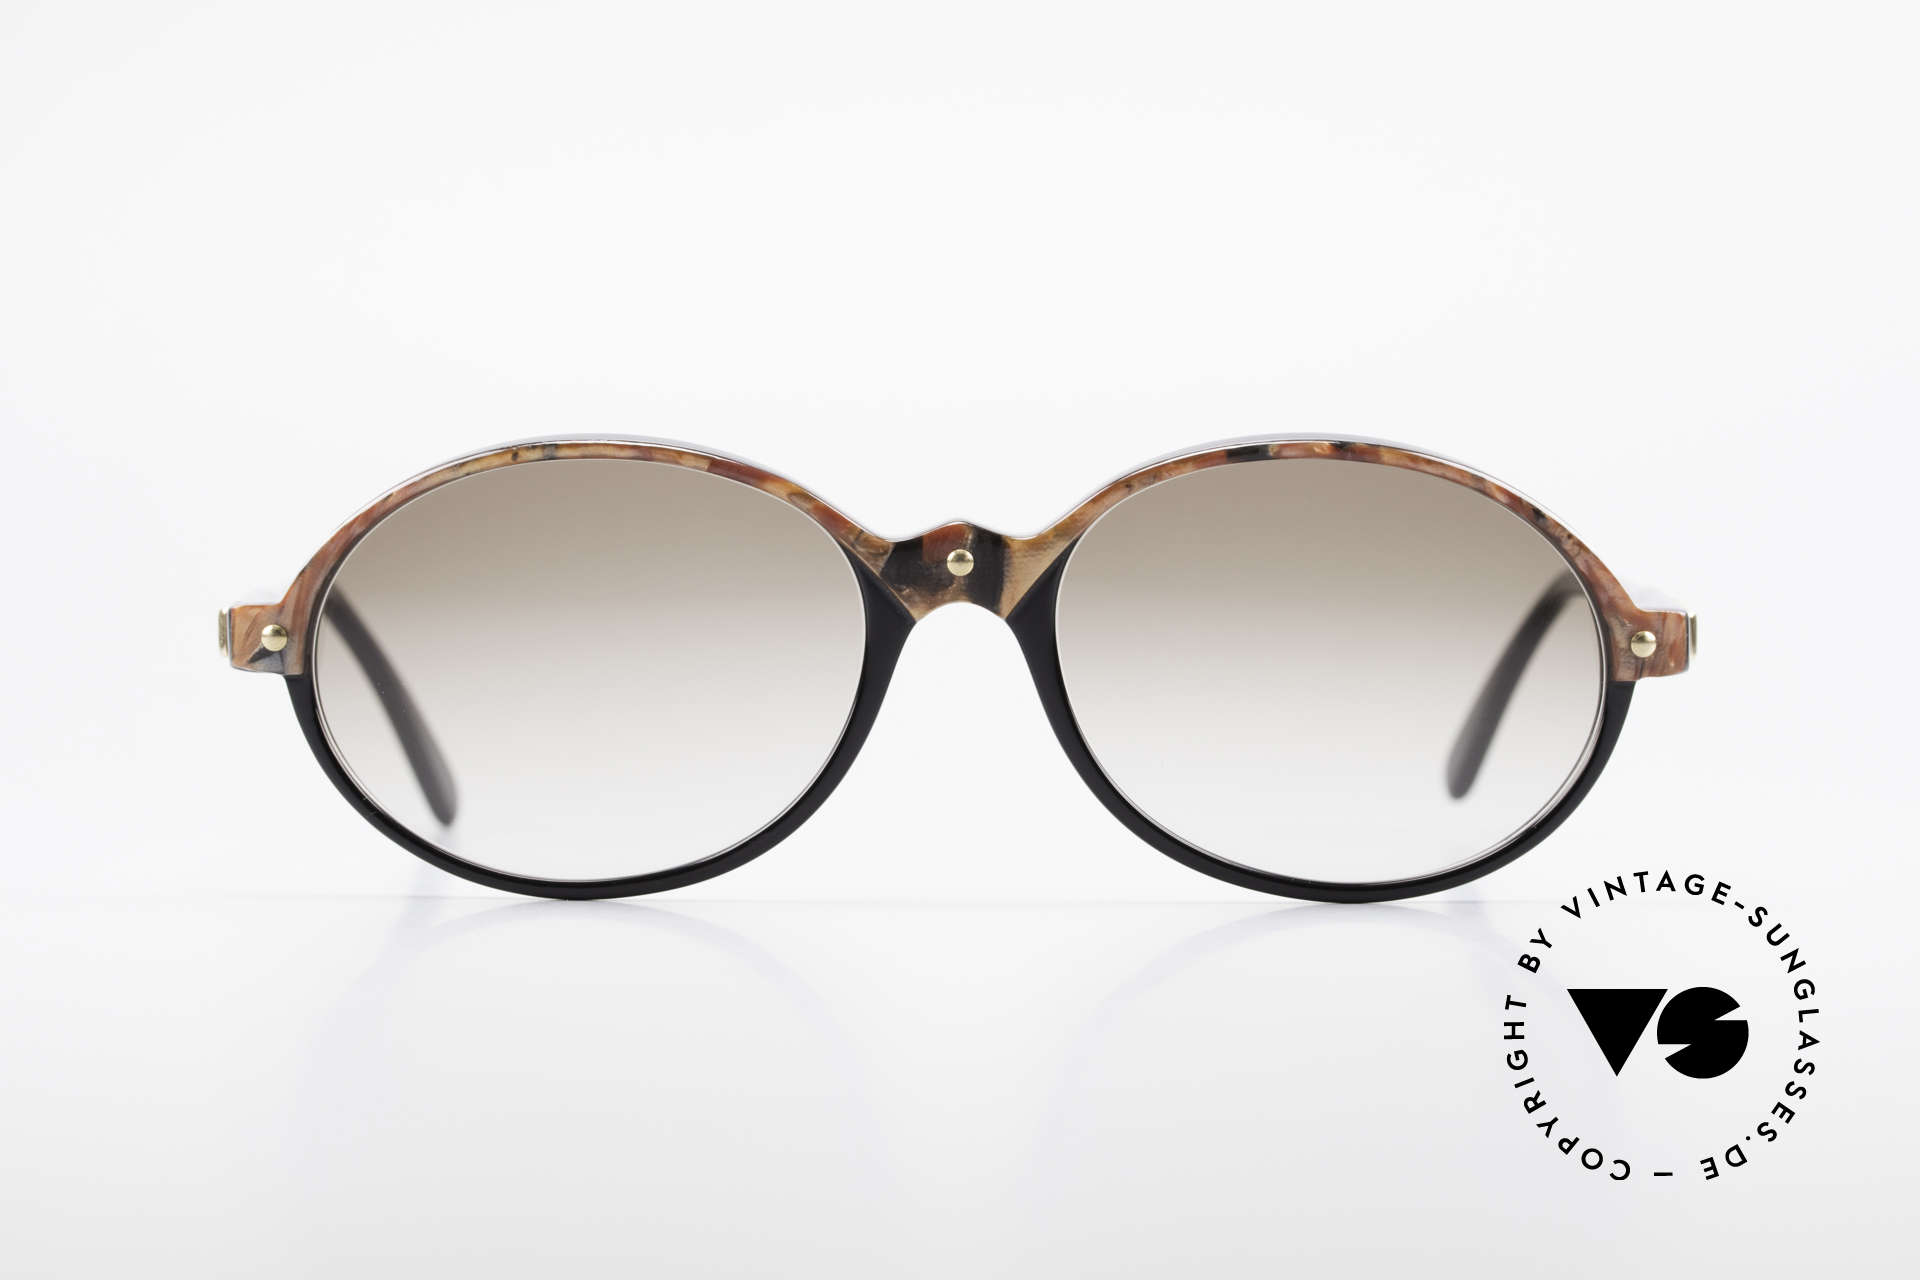 Cazal 328 Oval Vintage Sunglasses 90's, discreet colored (black / brown-marble / gold), Made for Women